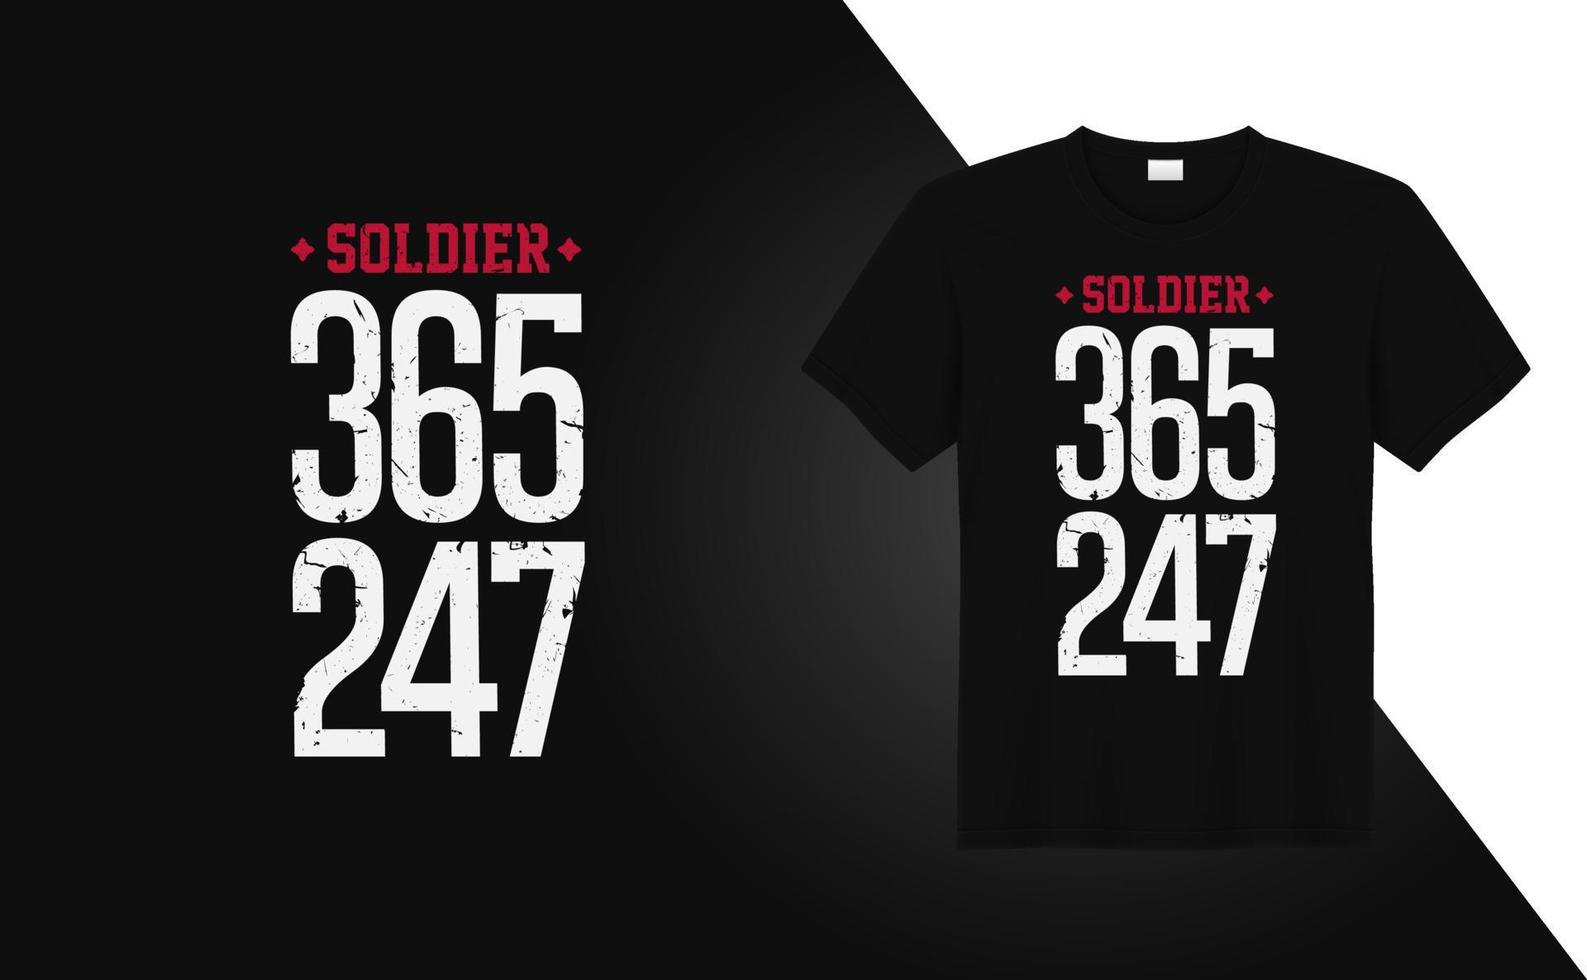 Soldier 365 247 vintage grunge army t-shirt design for t-shirt printing, clothing fashion, Poster, Wall art. Vector illustration art for t-shirt.